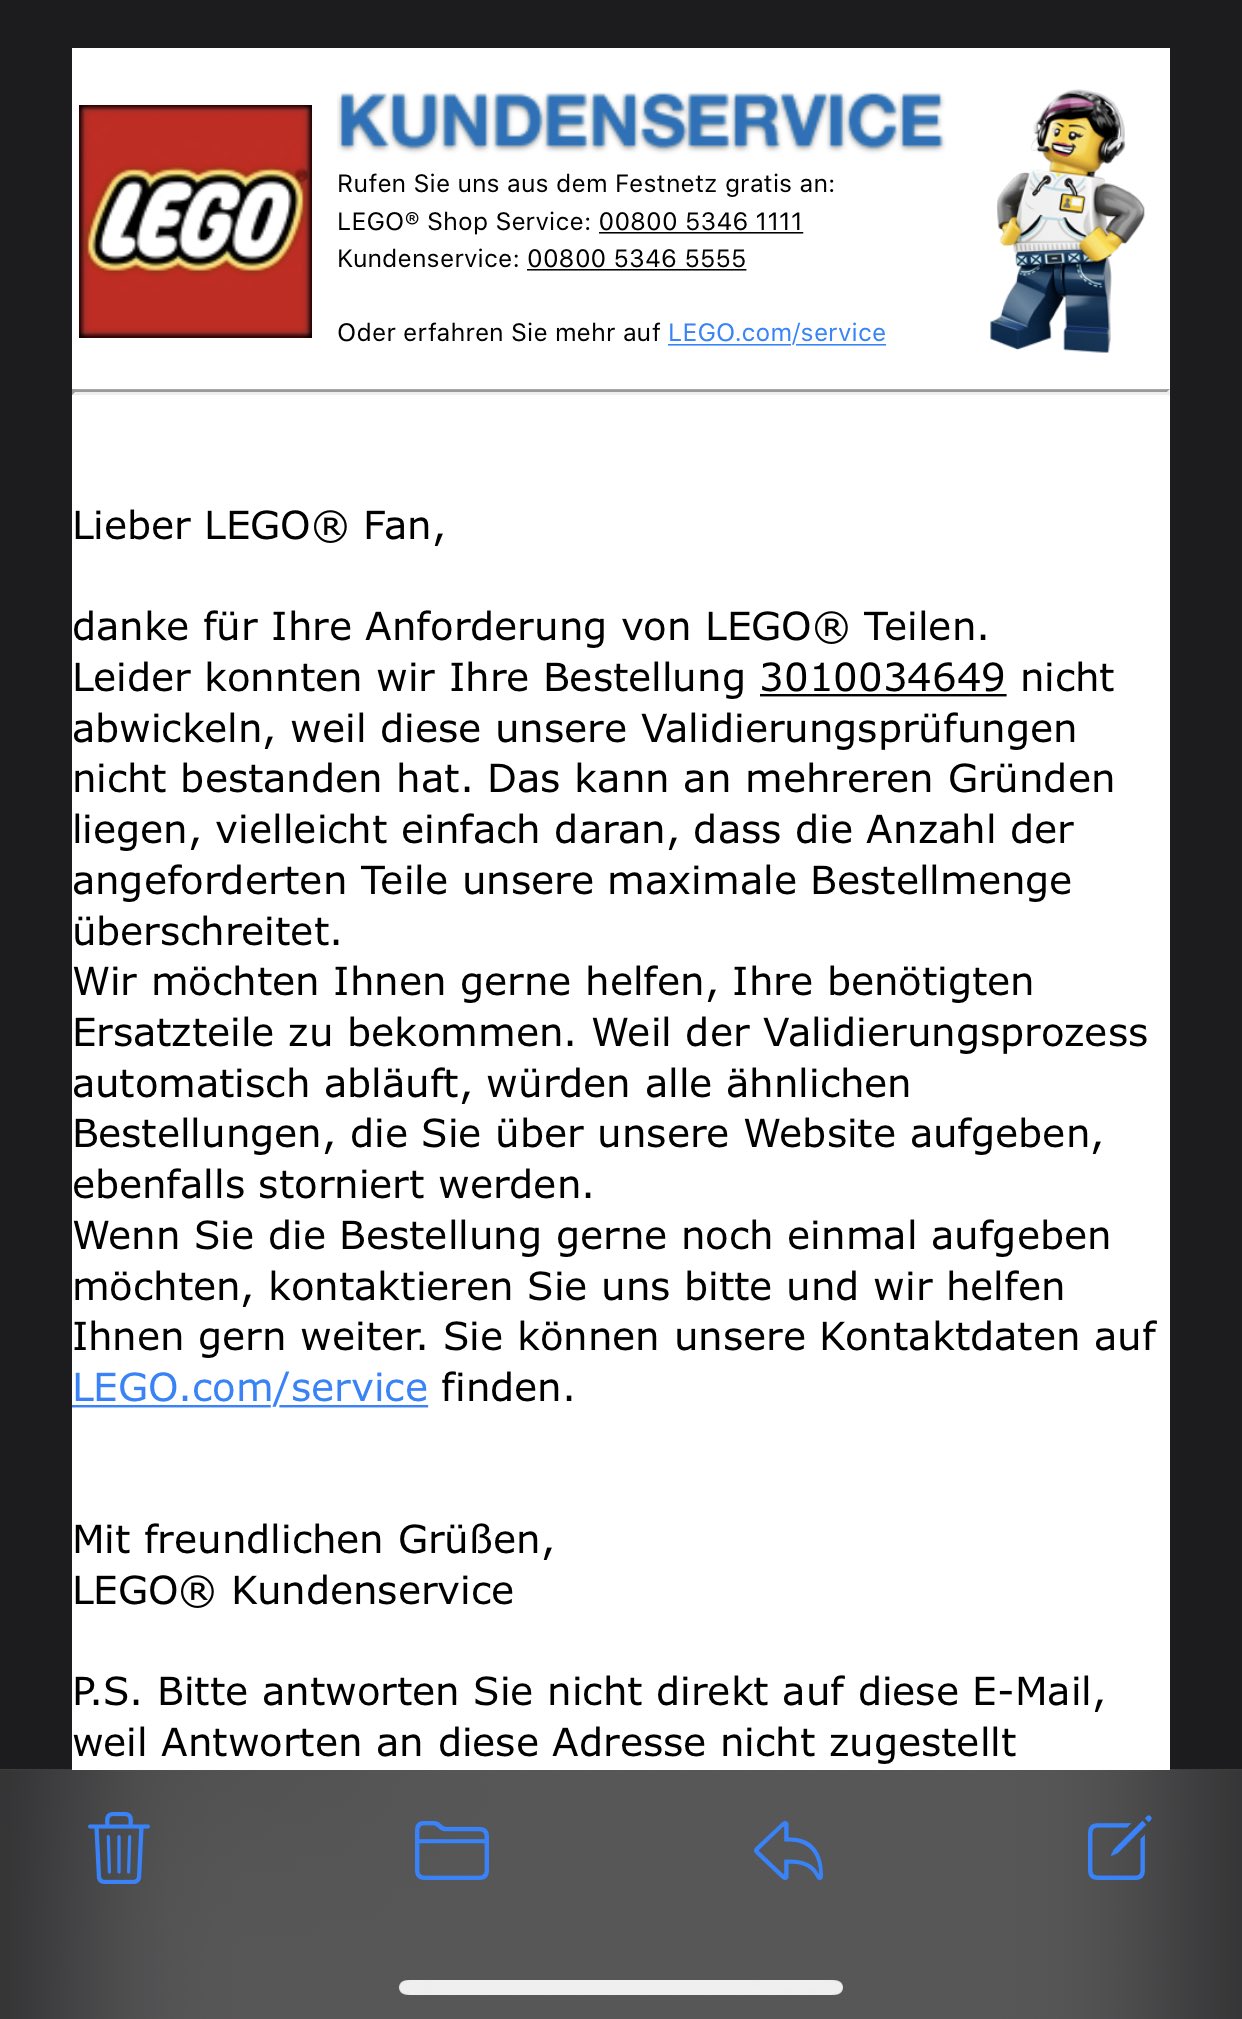 LEGO on Twitter: "@marchillebrand We're sorry for the frustrating  experience! We'll be happy to help. Please send us a DM. 🙂  https://t.co/rOMgJRSLD0" / Twitter